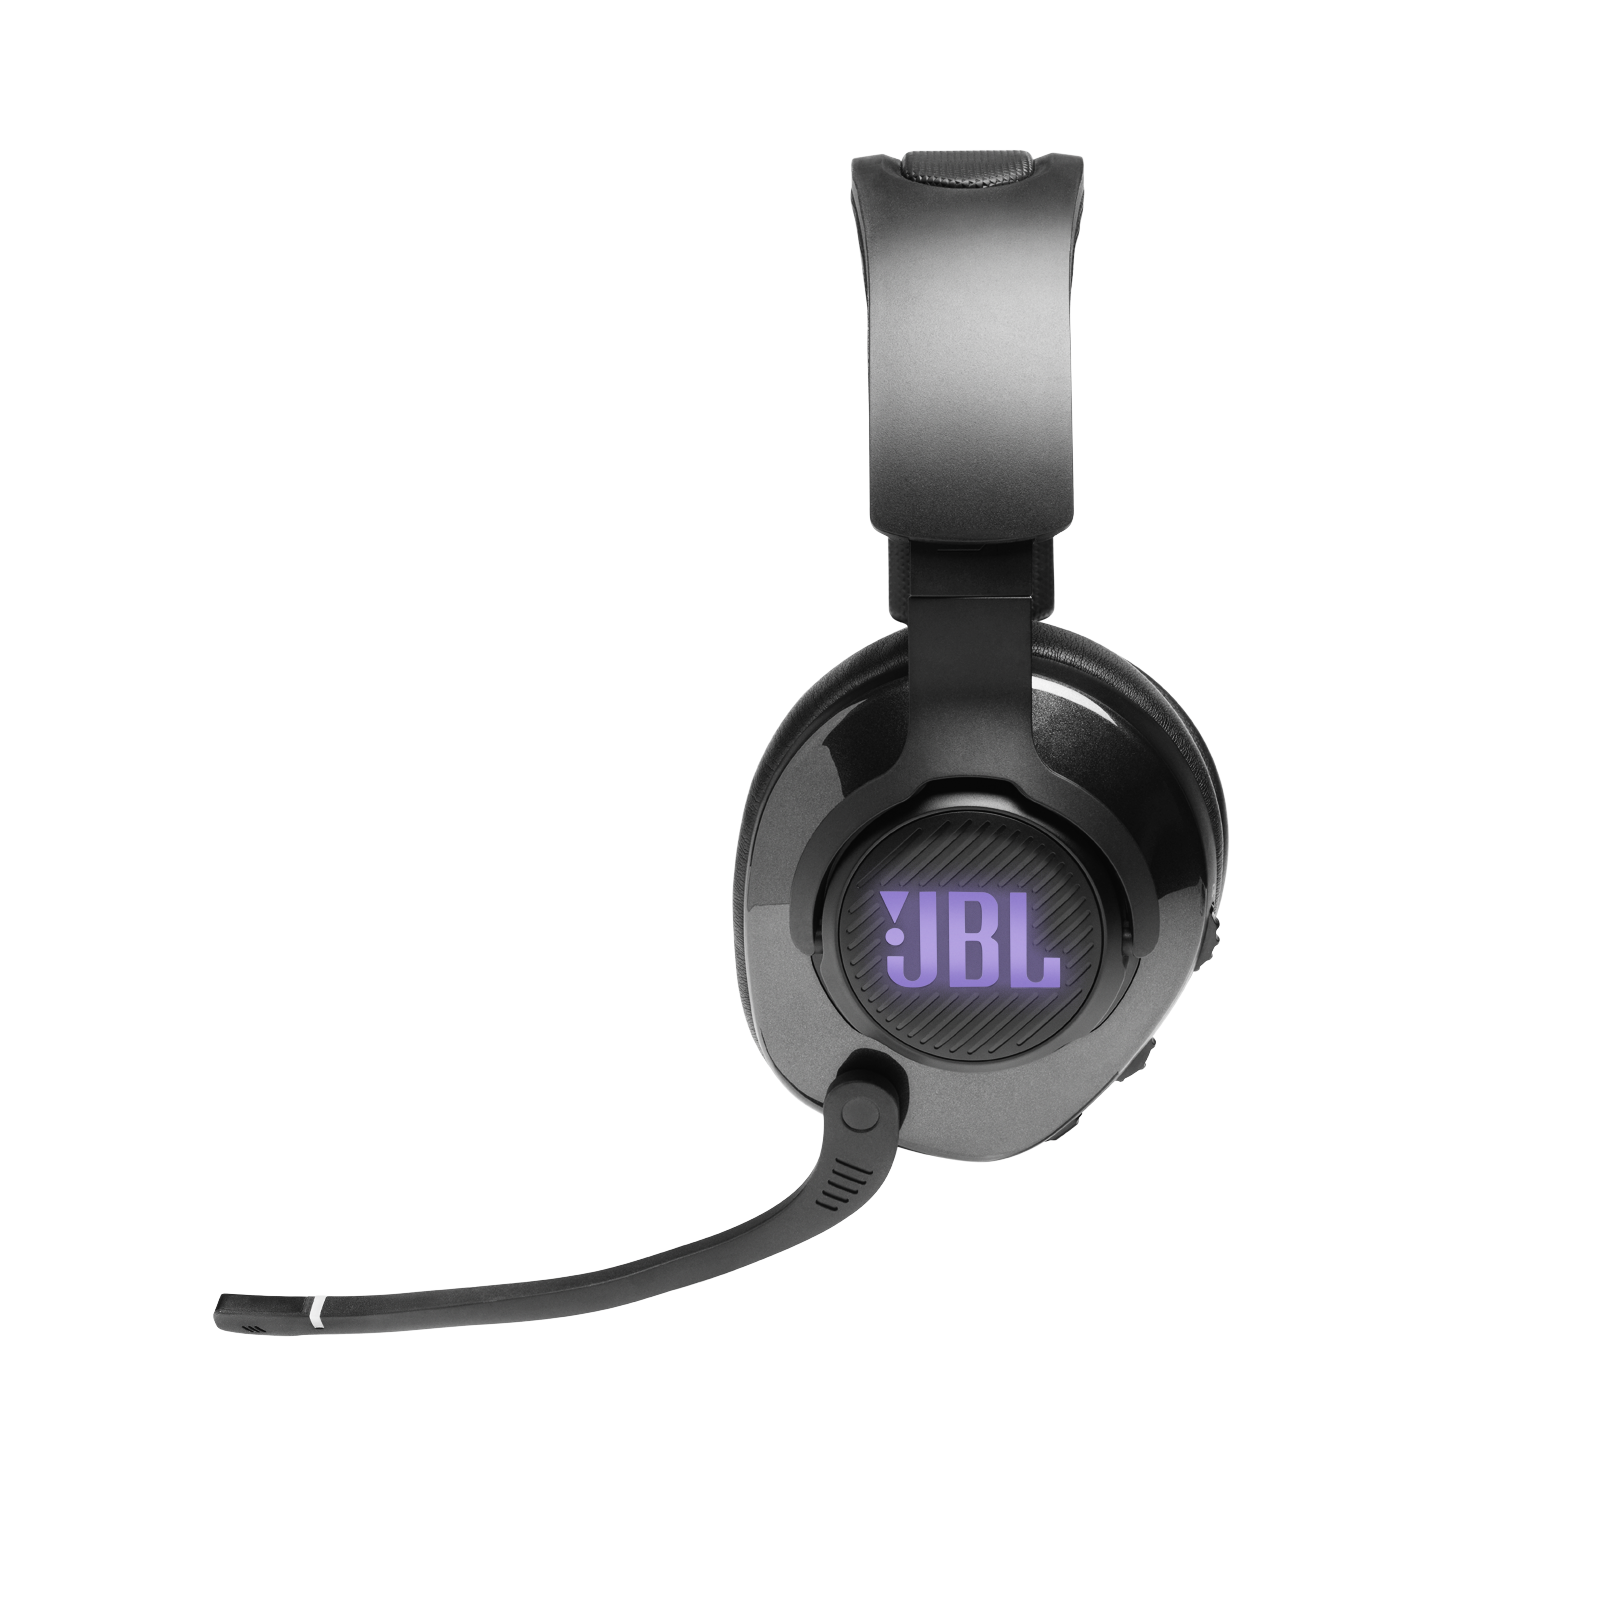 JBL Quantum 400 - Black - USB over-ear PC gaming headset with game-chat dial - Detailshot 5